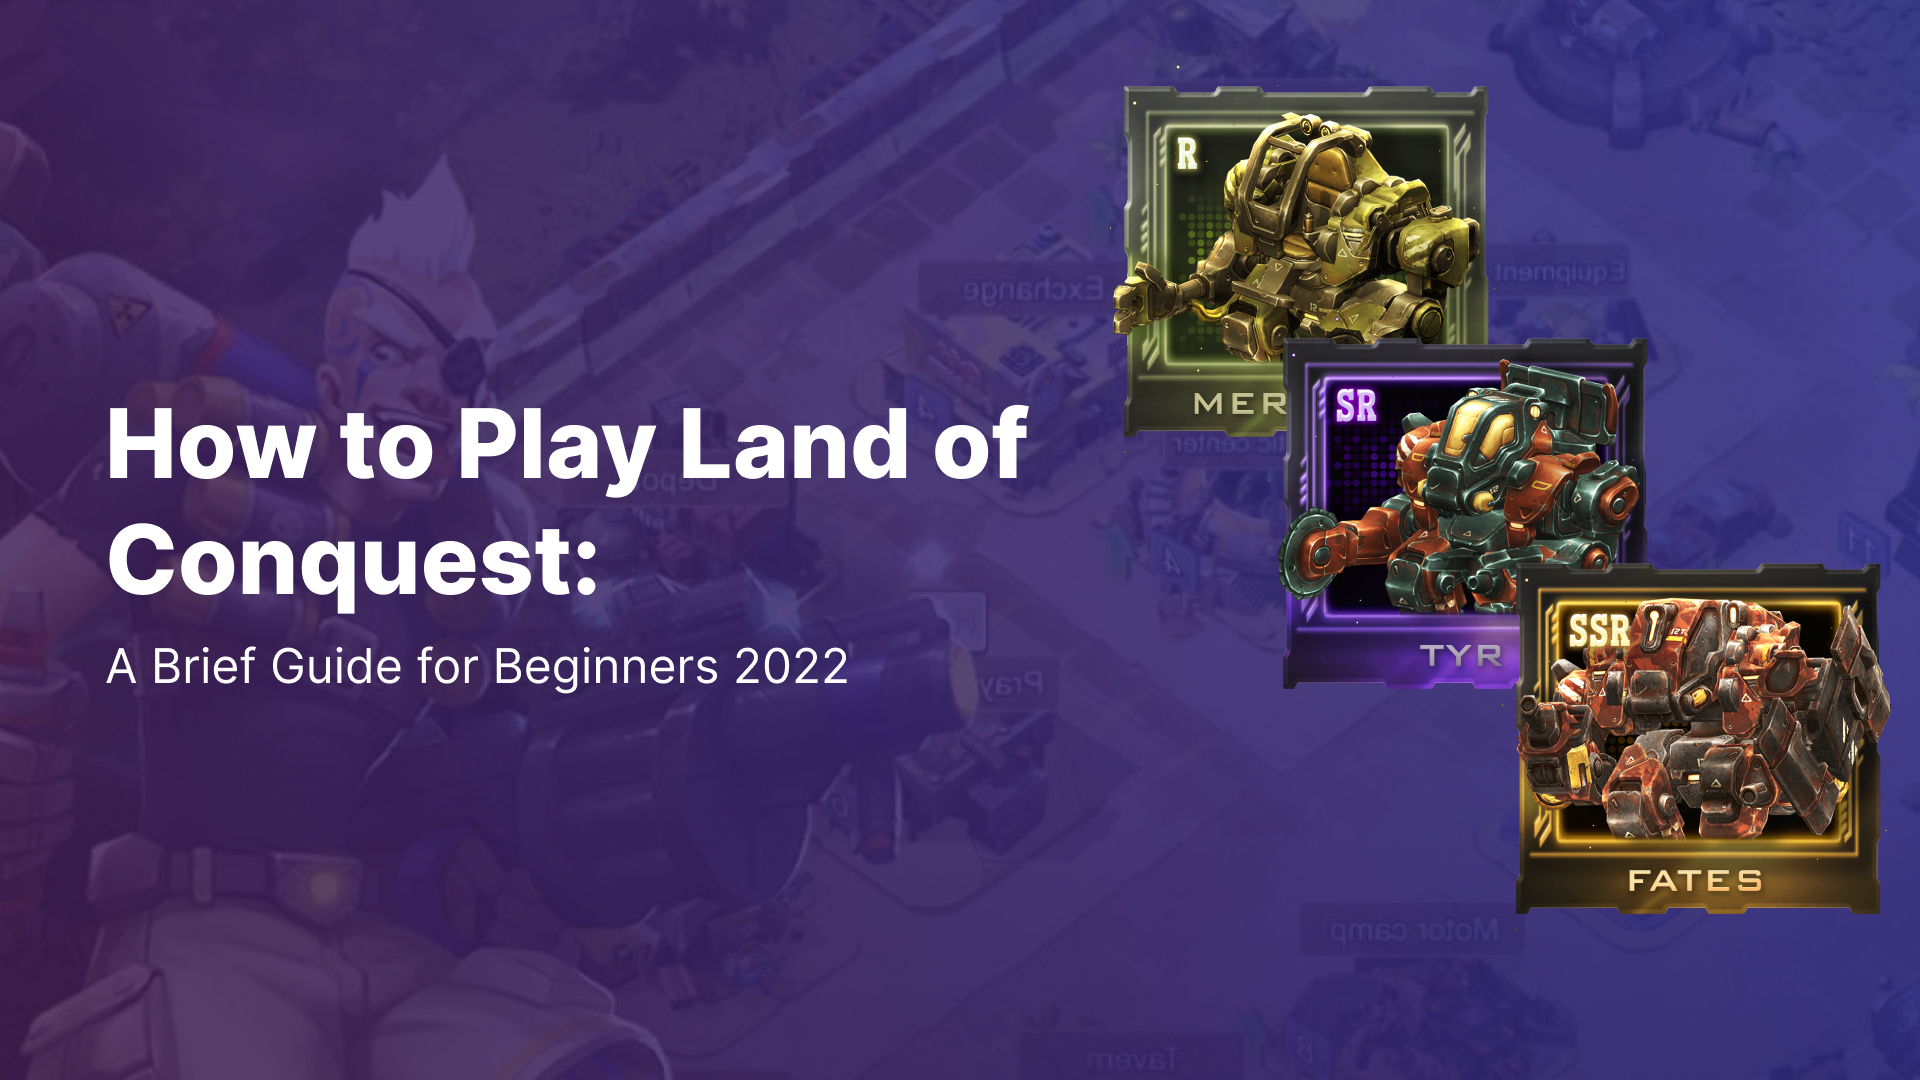 How to Play Land of Conquest: A Brief Guide for Beginners 2022